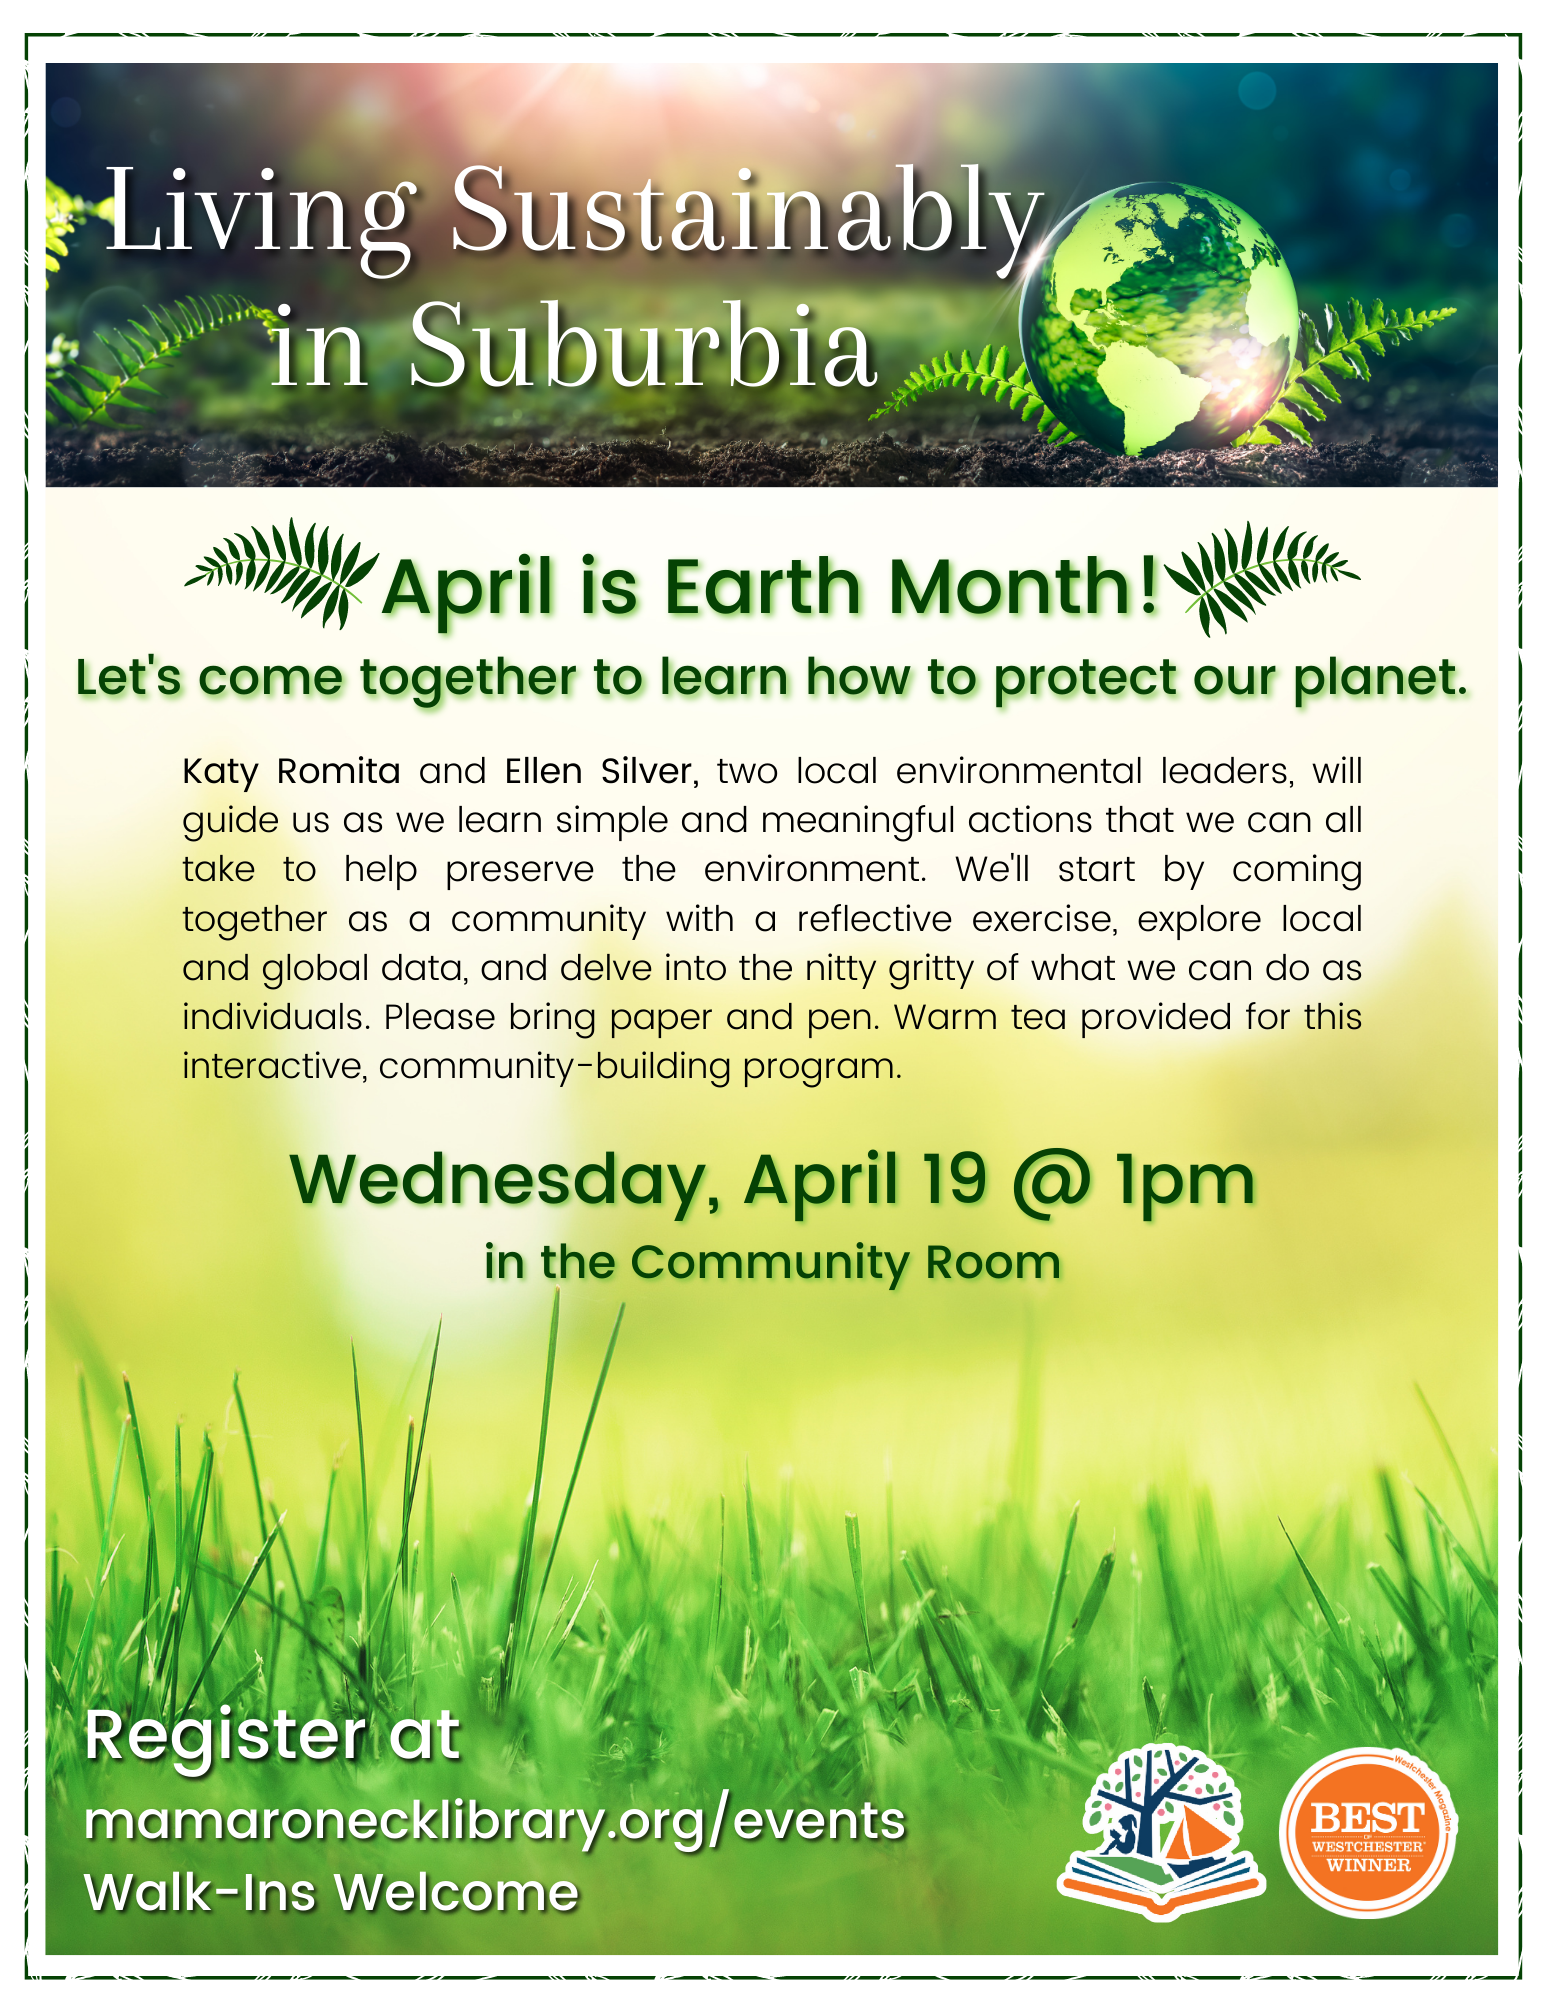 4/19 @ 1pm in the Community Room: Living Sustainably in Suburbia